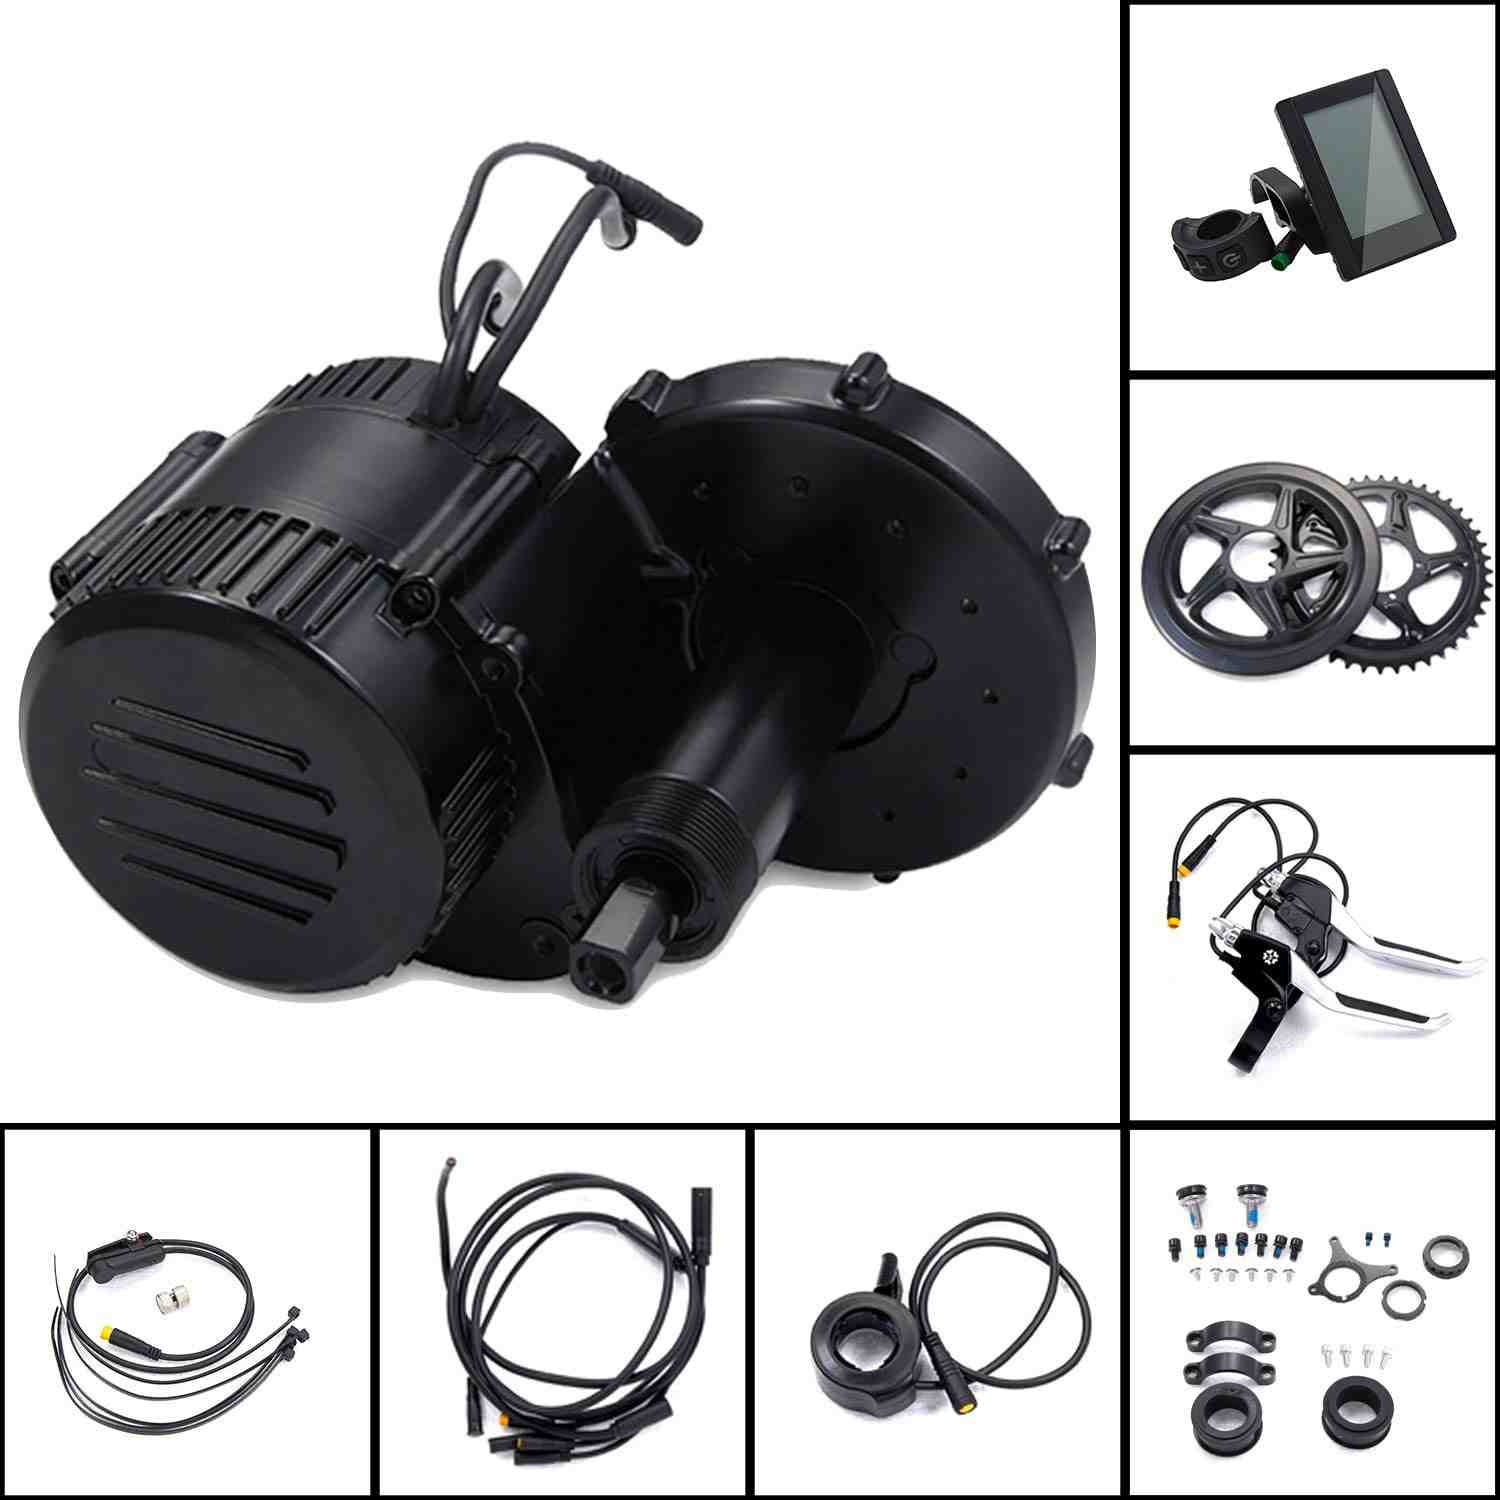 What is the price of electric cycle kit?